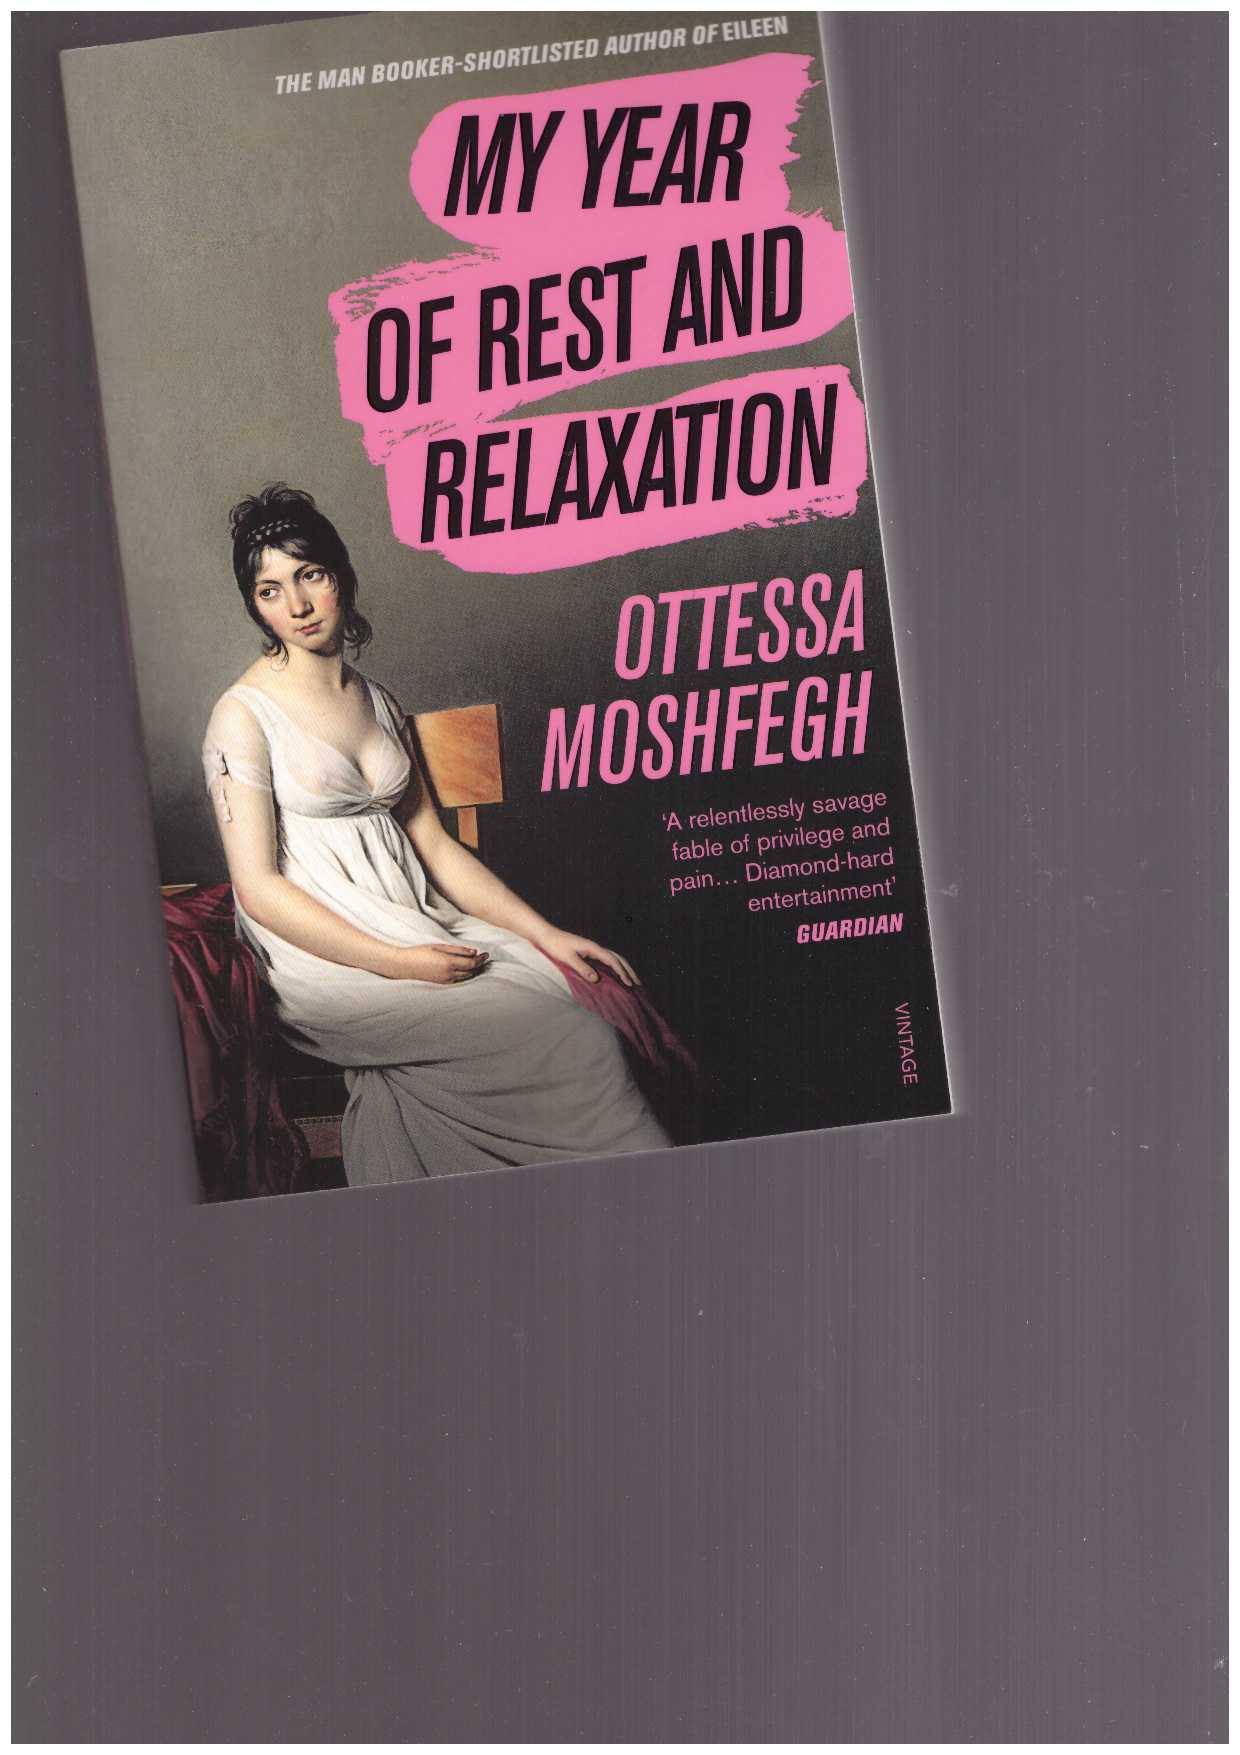 MOSHFEGH, Ottessa  - My Year of Rest and Relaxation